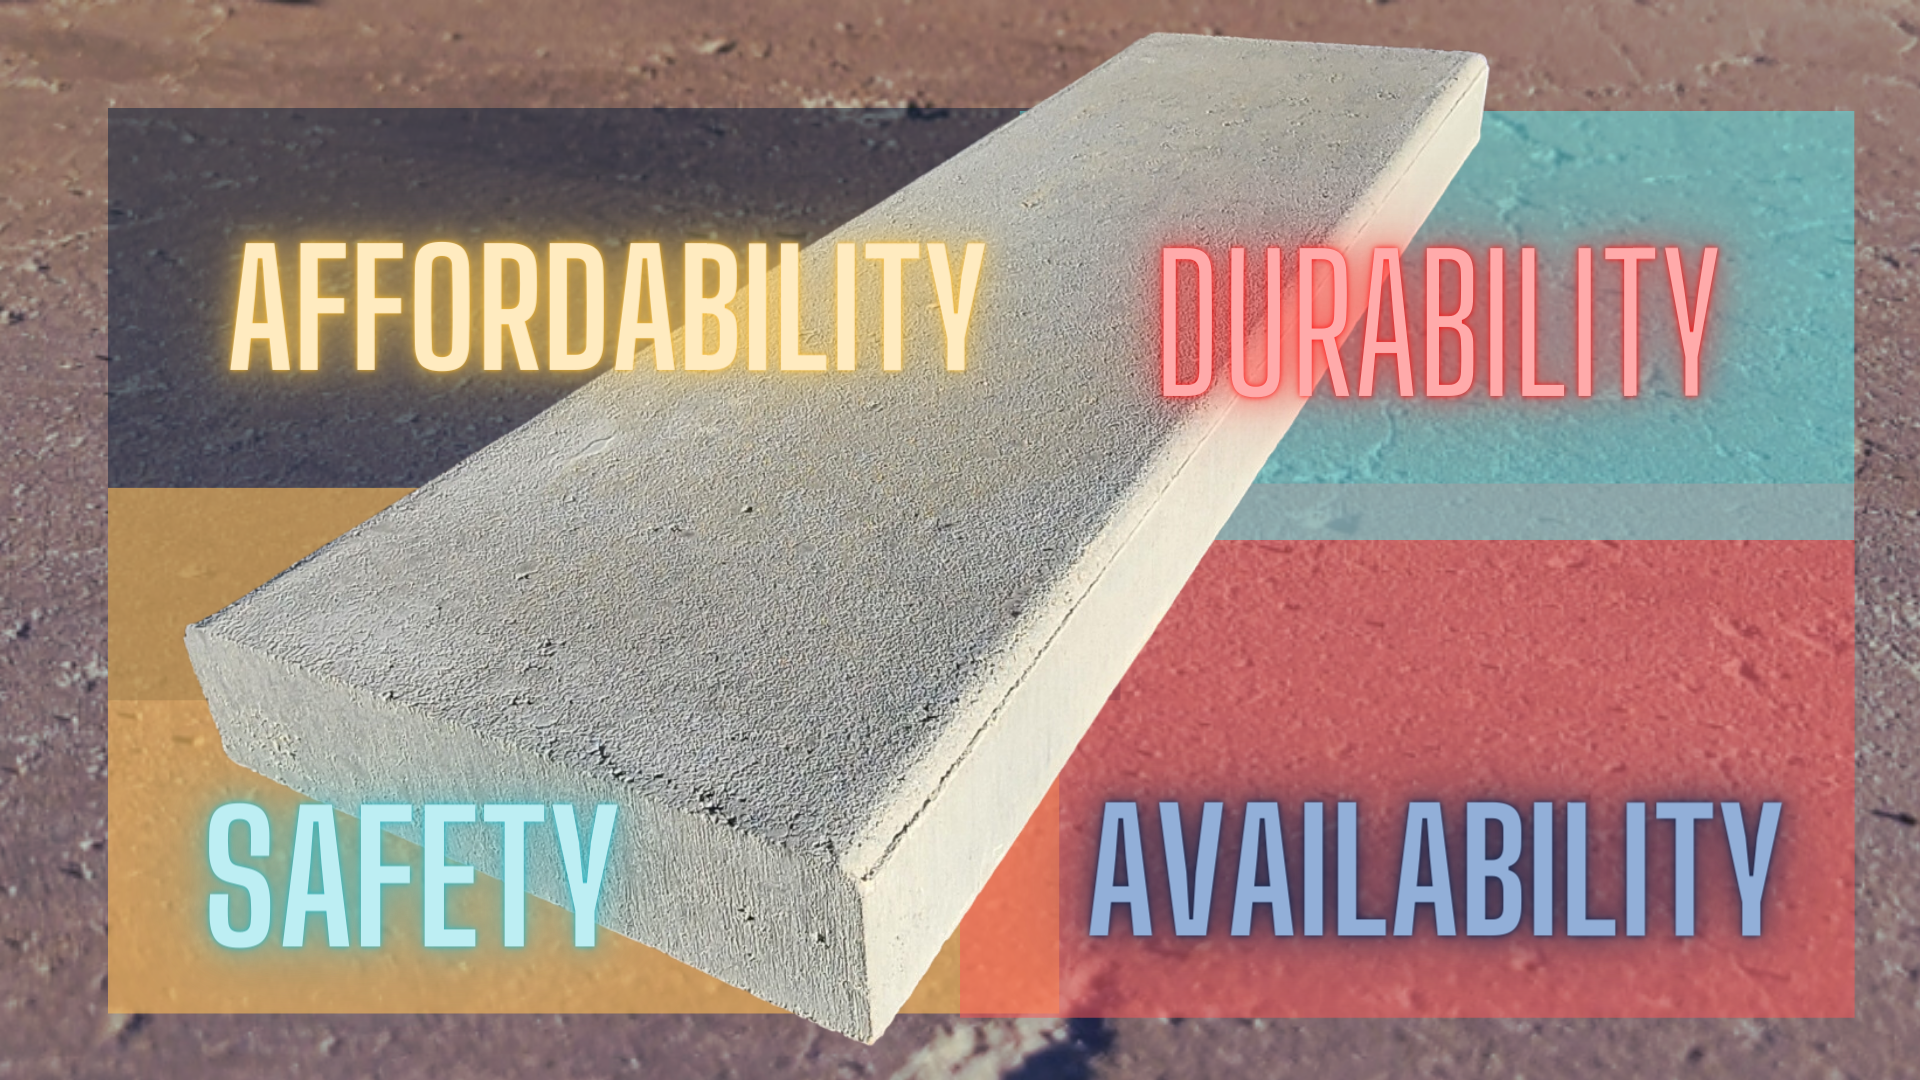 concrete exterior stairs are Durable, Safe, Affordable and Available.